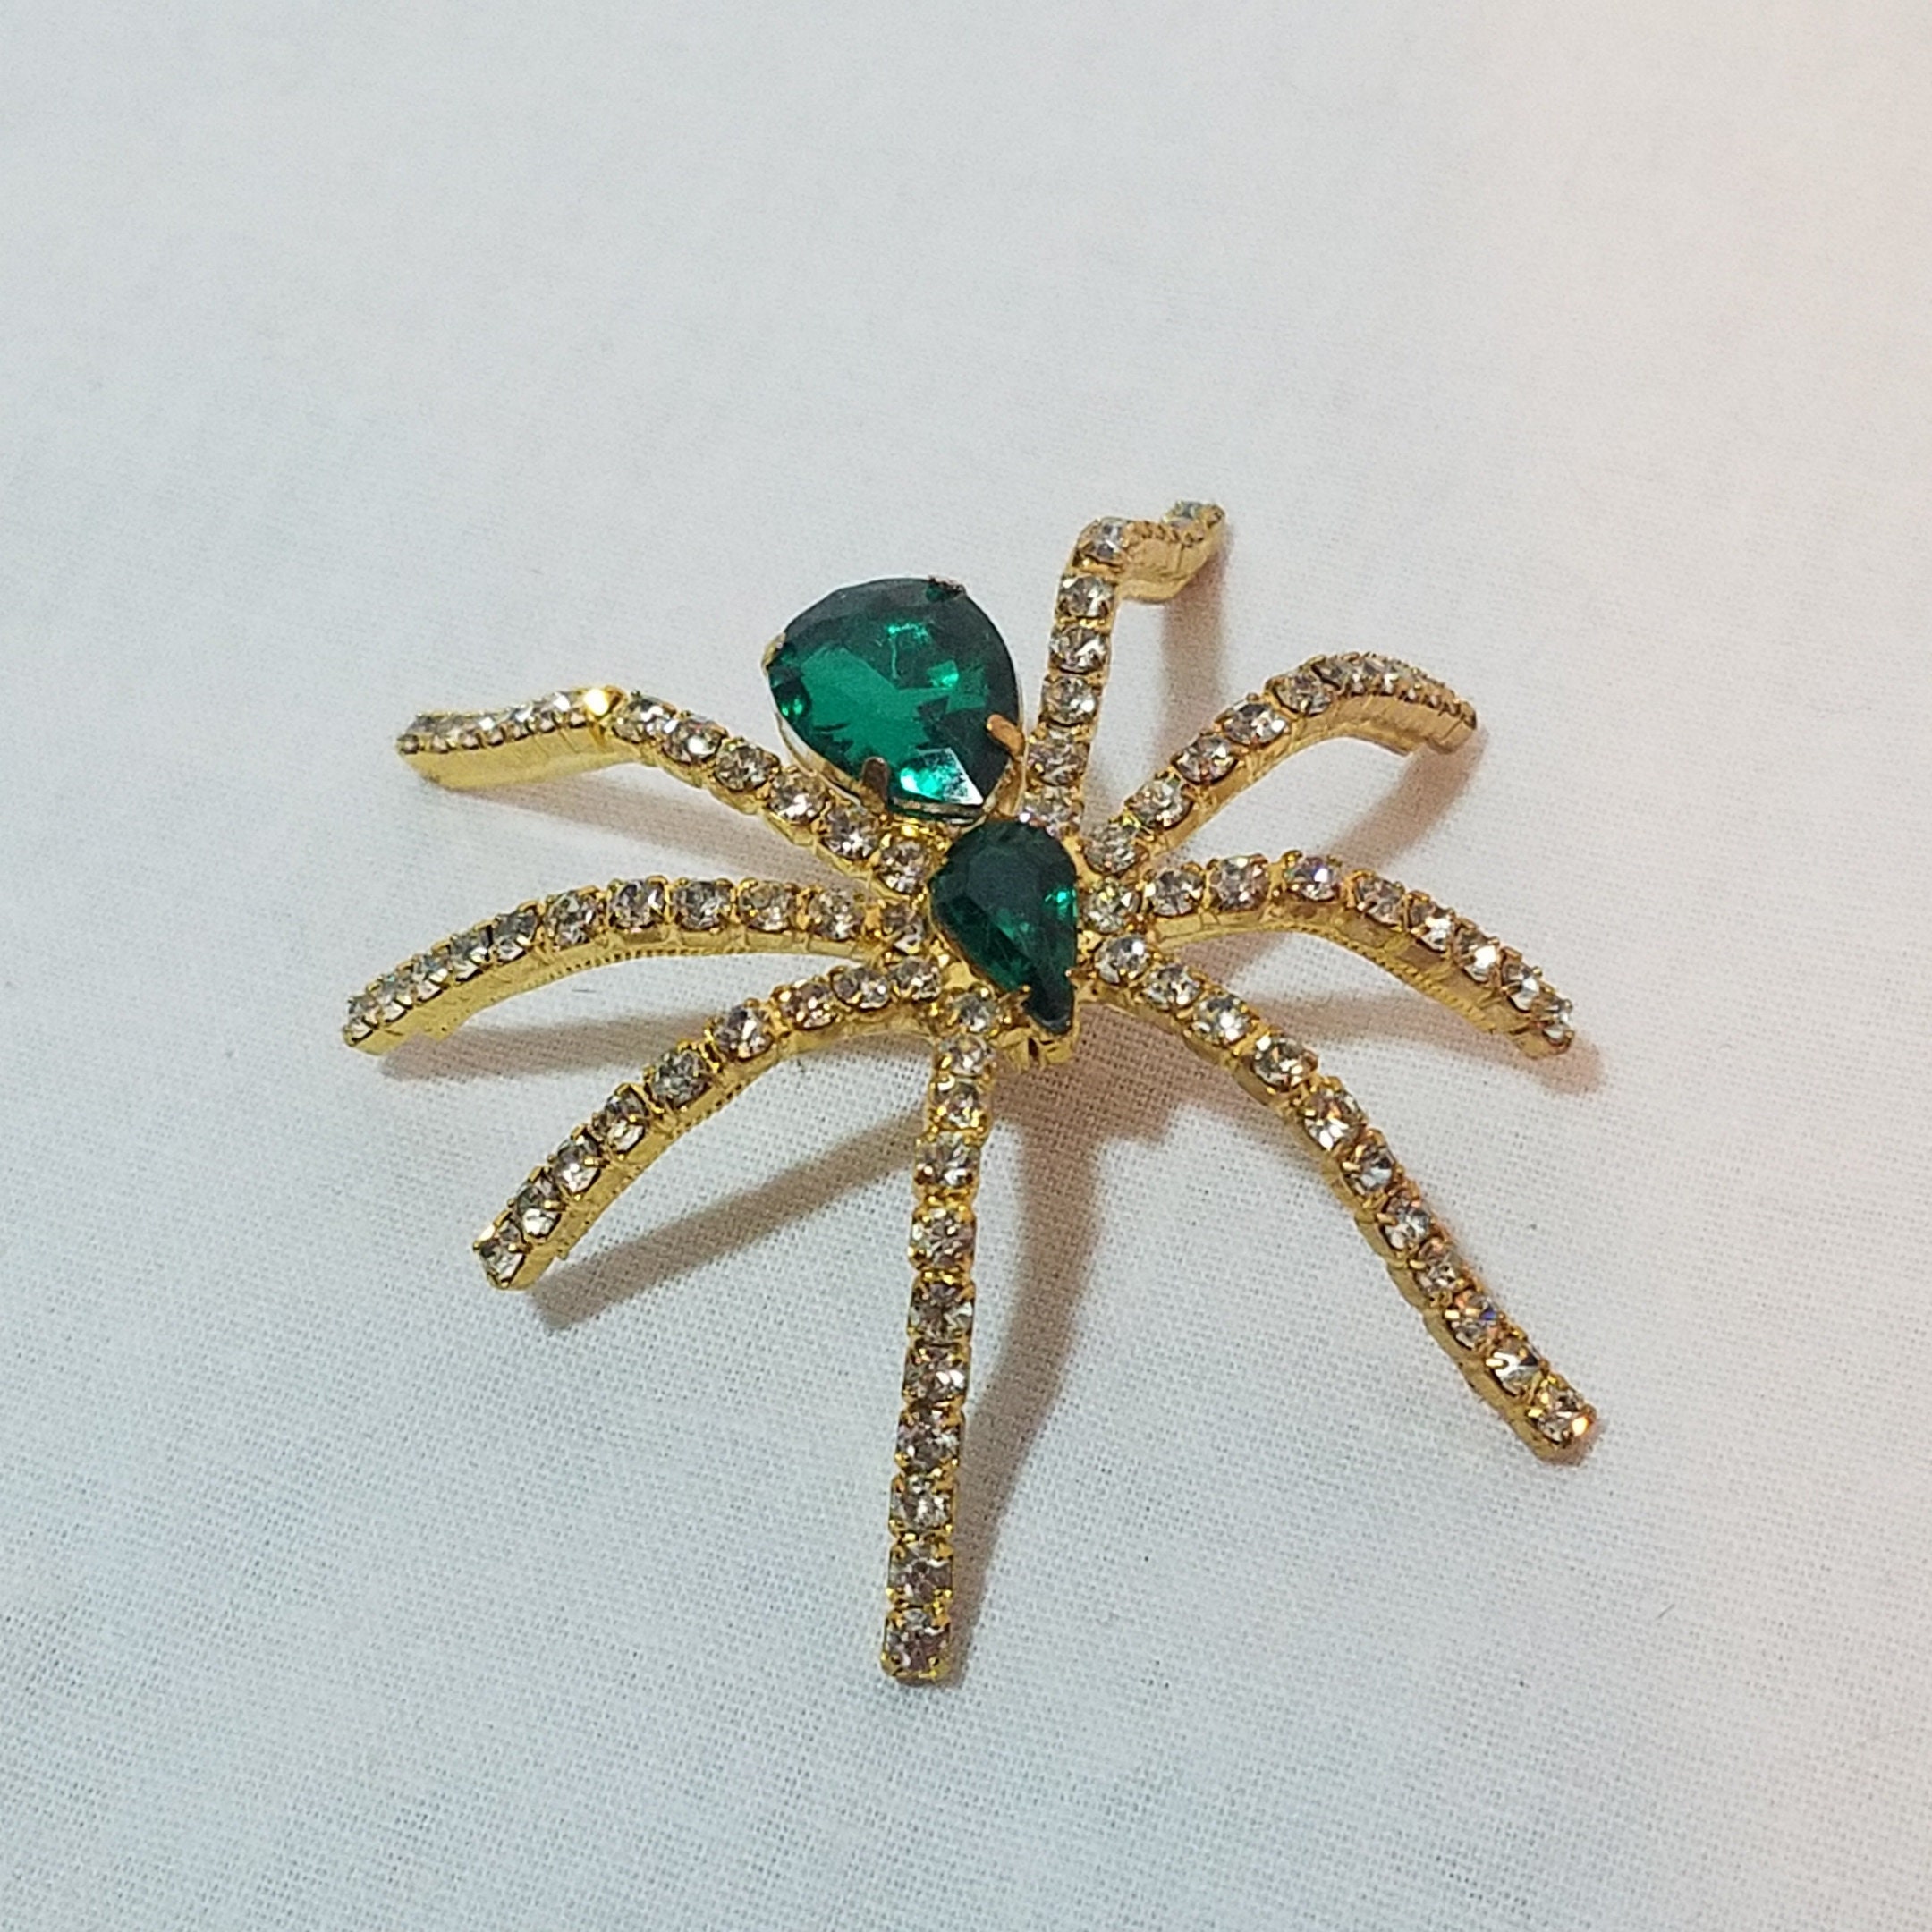 Vintage Large Rhinestone Spider Brooch Pin with Green Eyes – Hers